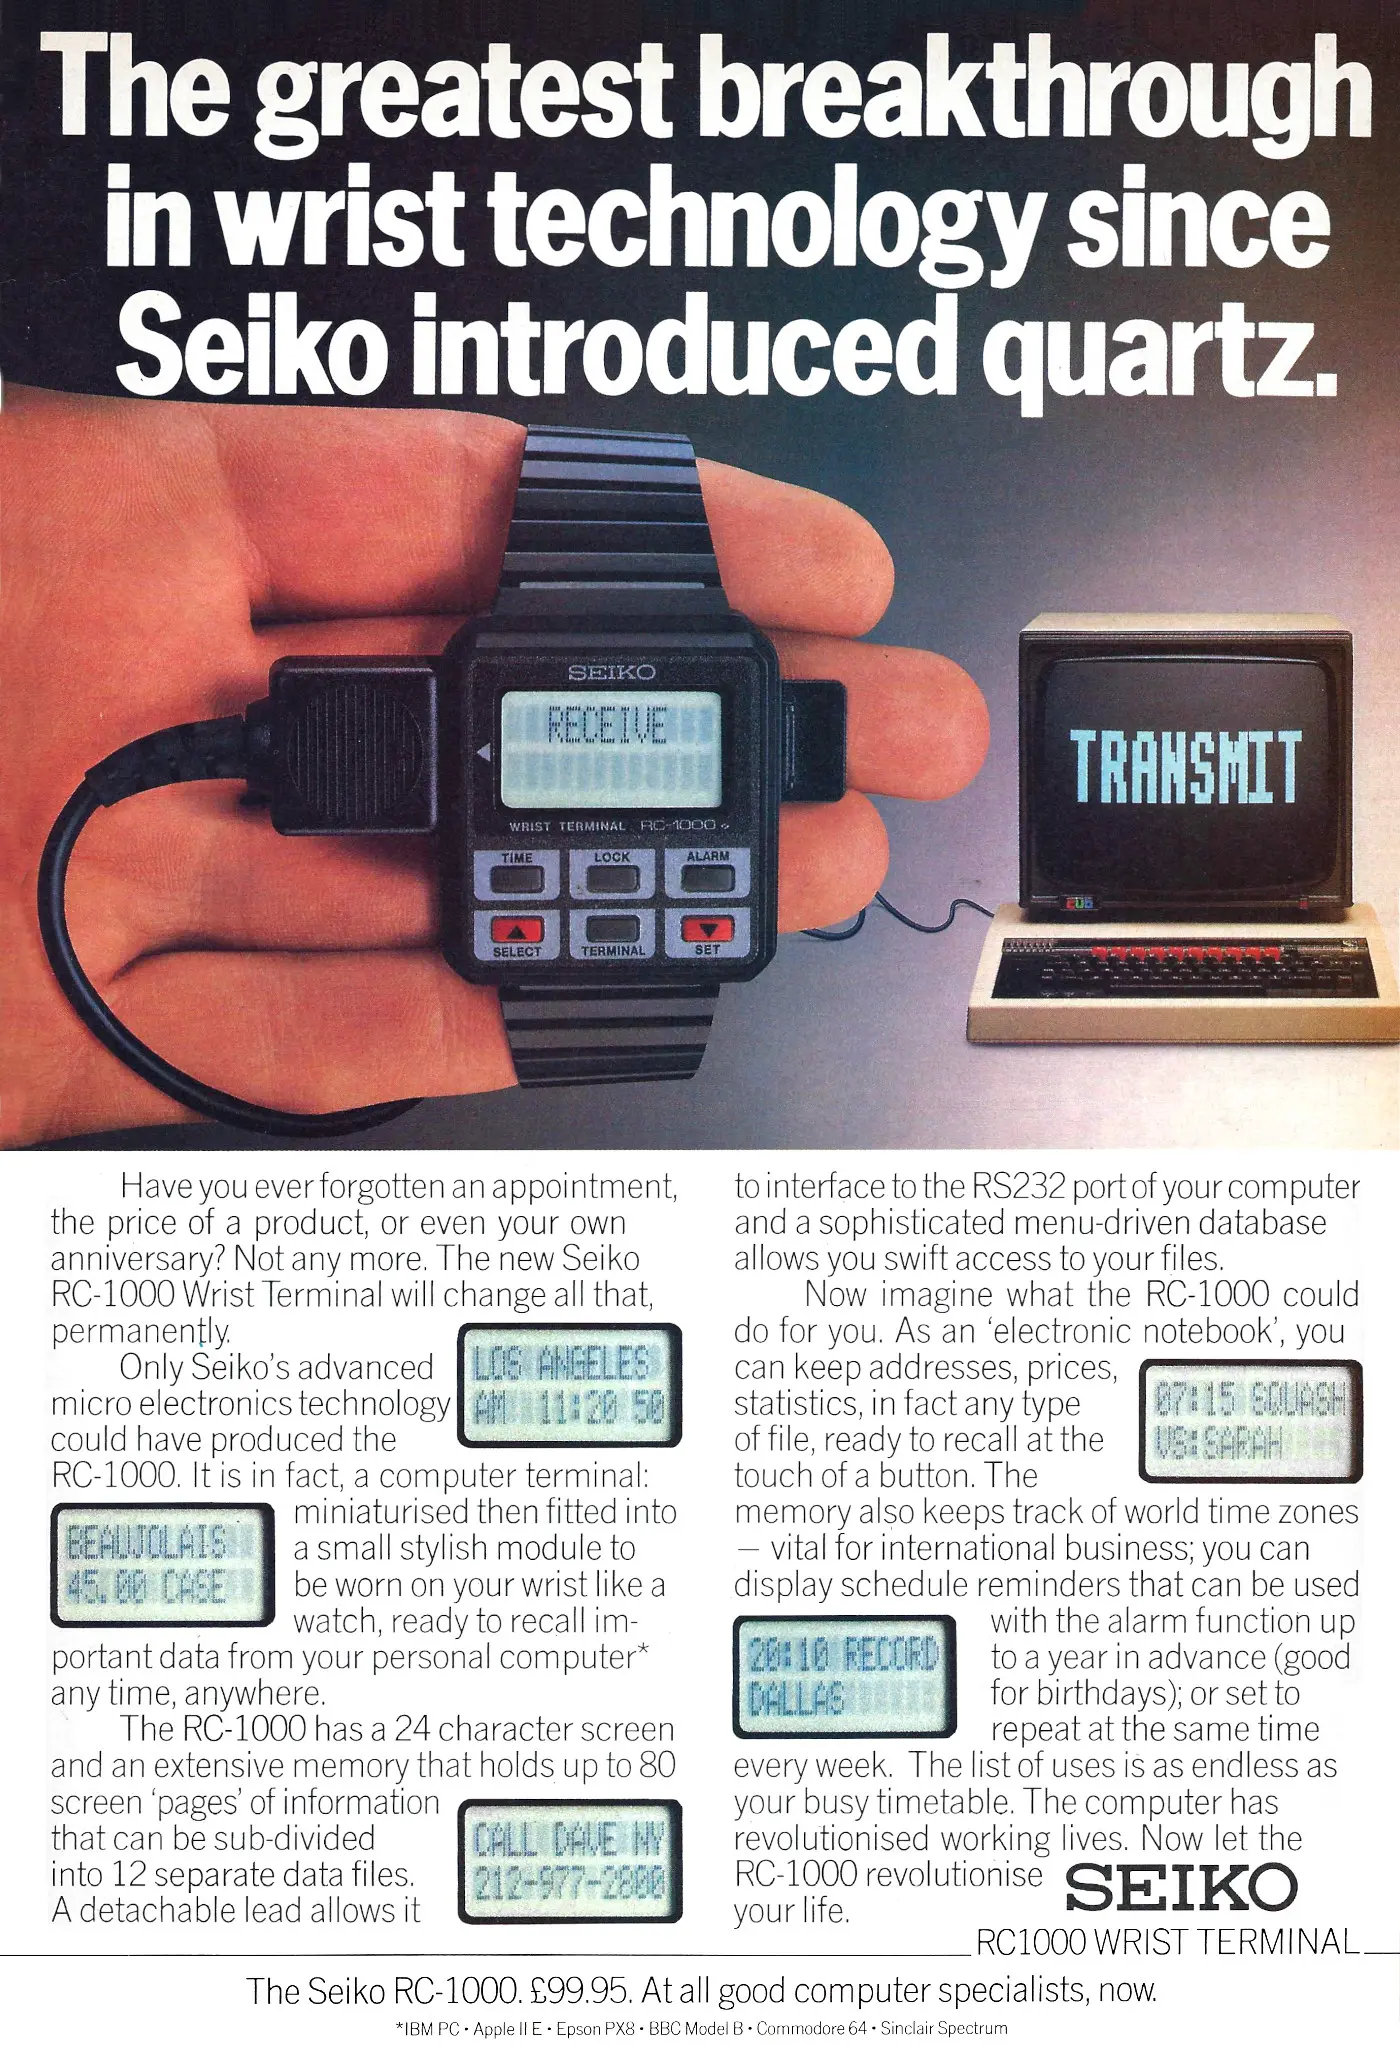 Seiko Advert: The greatest breakthrough in wrist technology since Seiko introduced quartz, from Commodore User, October 1985